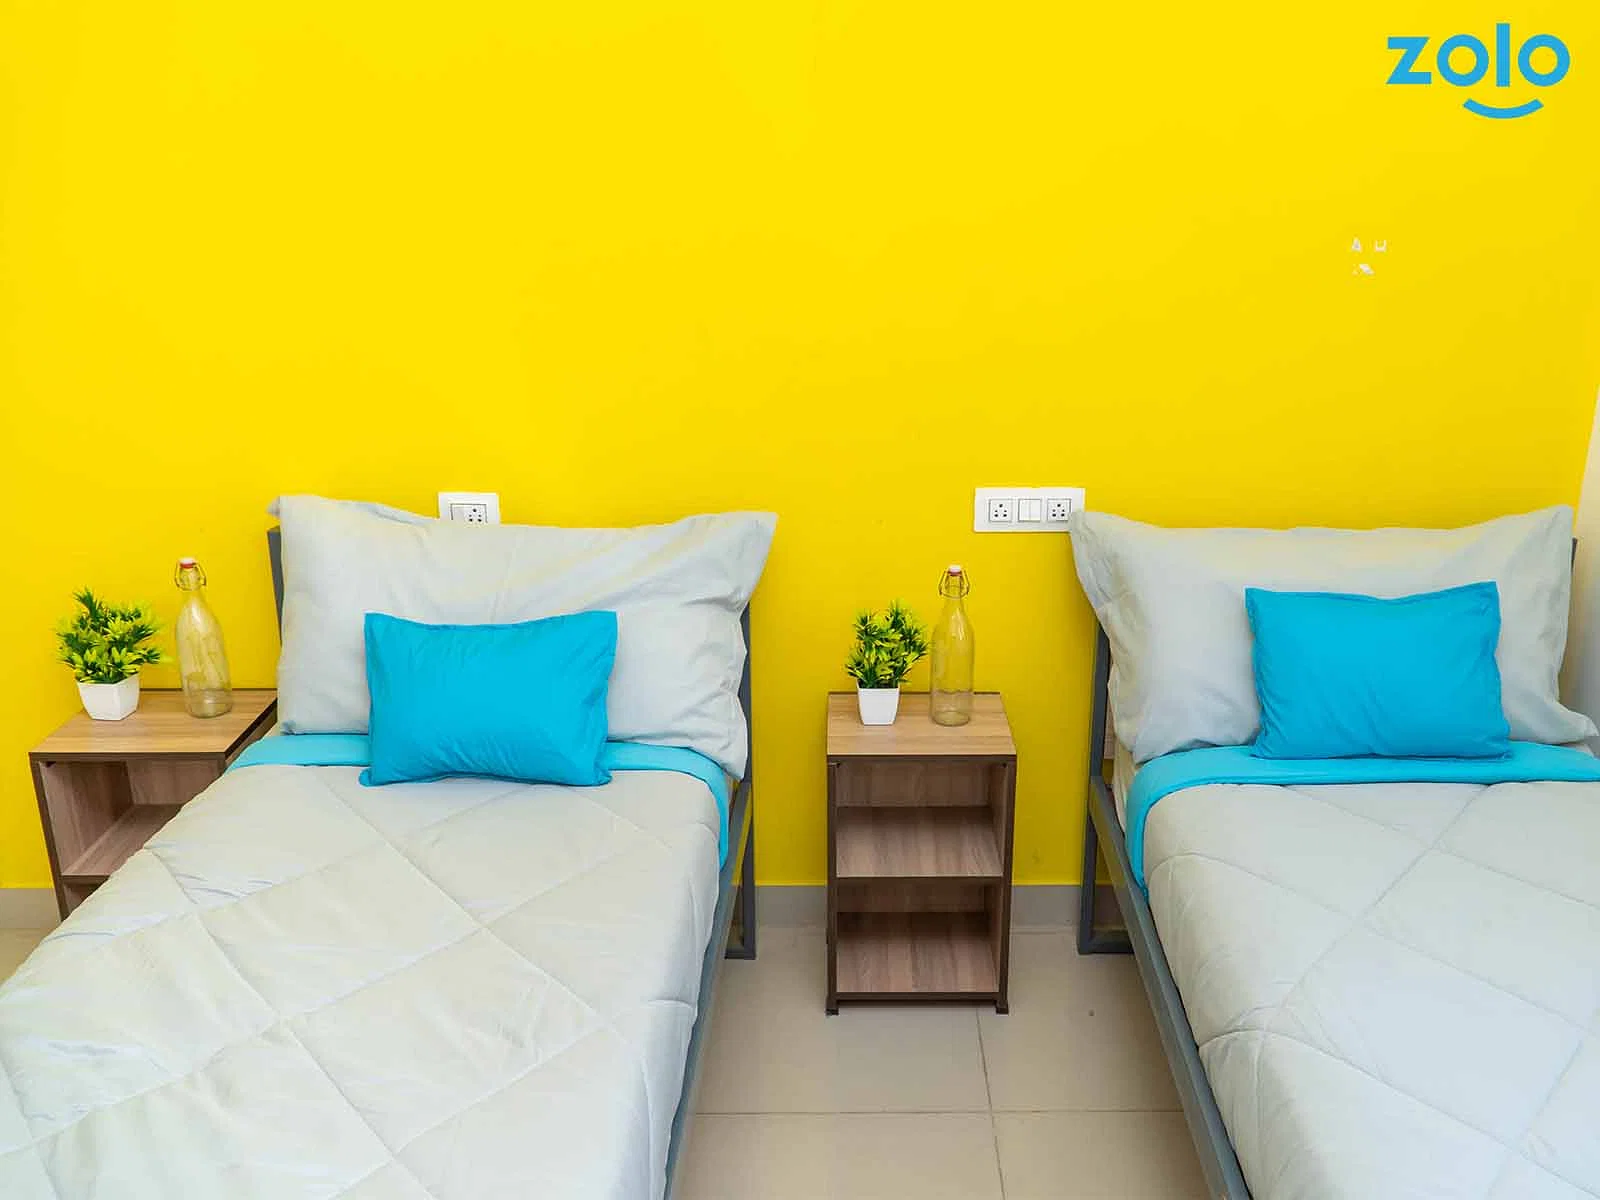 luxury PG accommodations with modern Wi-Fi, AC, and TV in Sarjapura-Bangalore-Zolo Estonia A